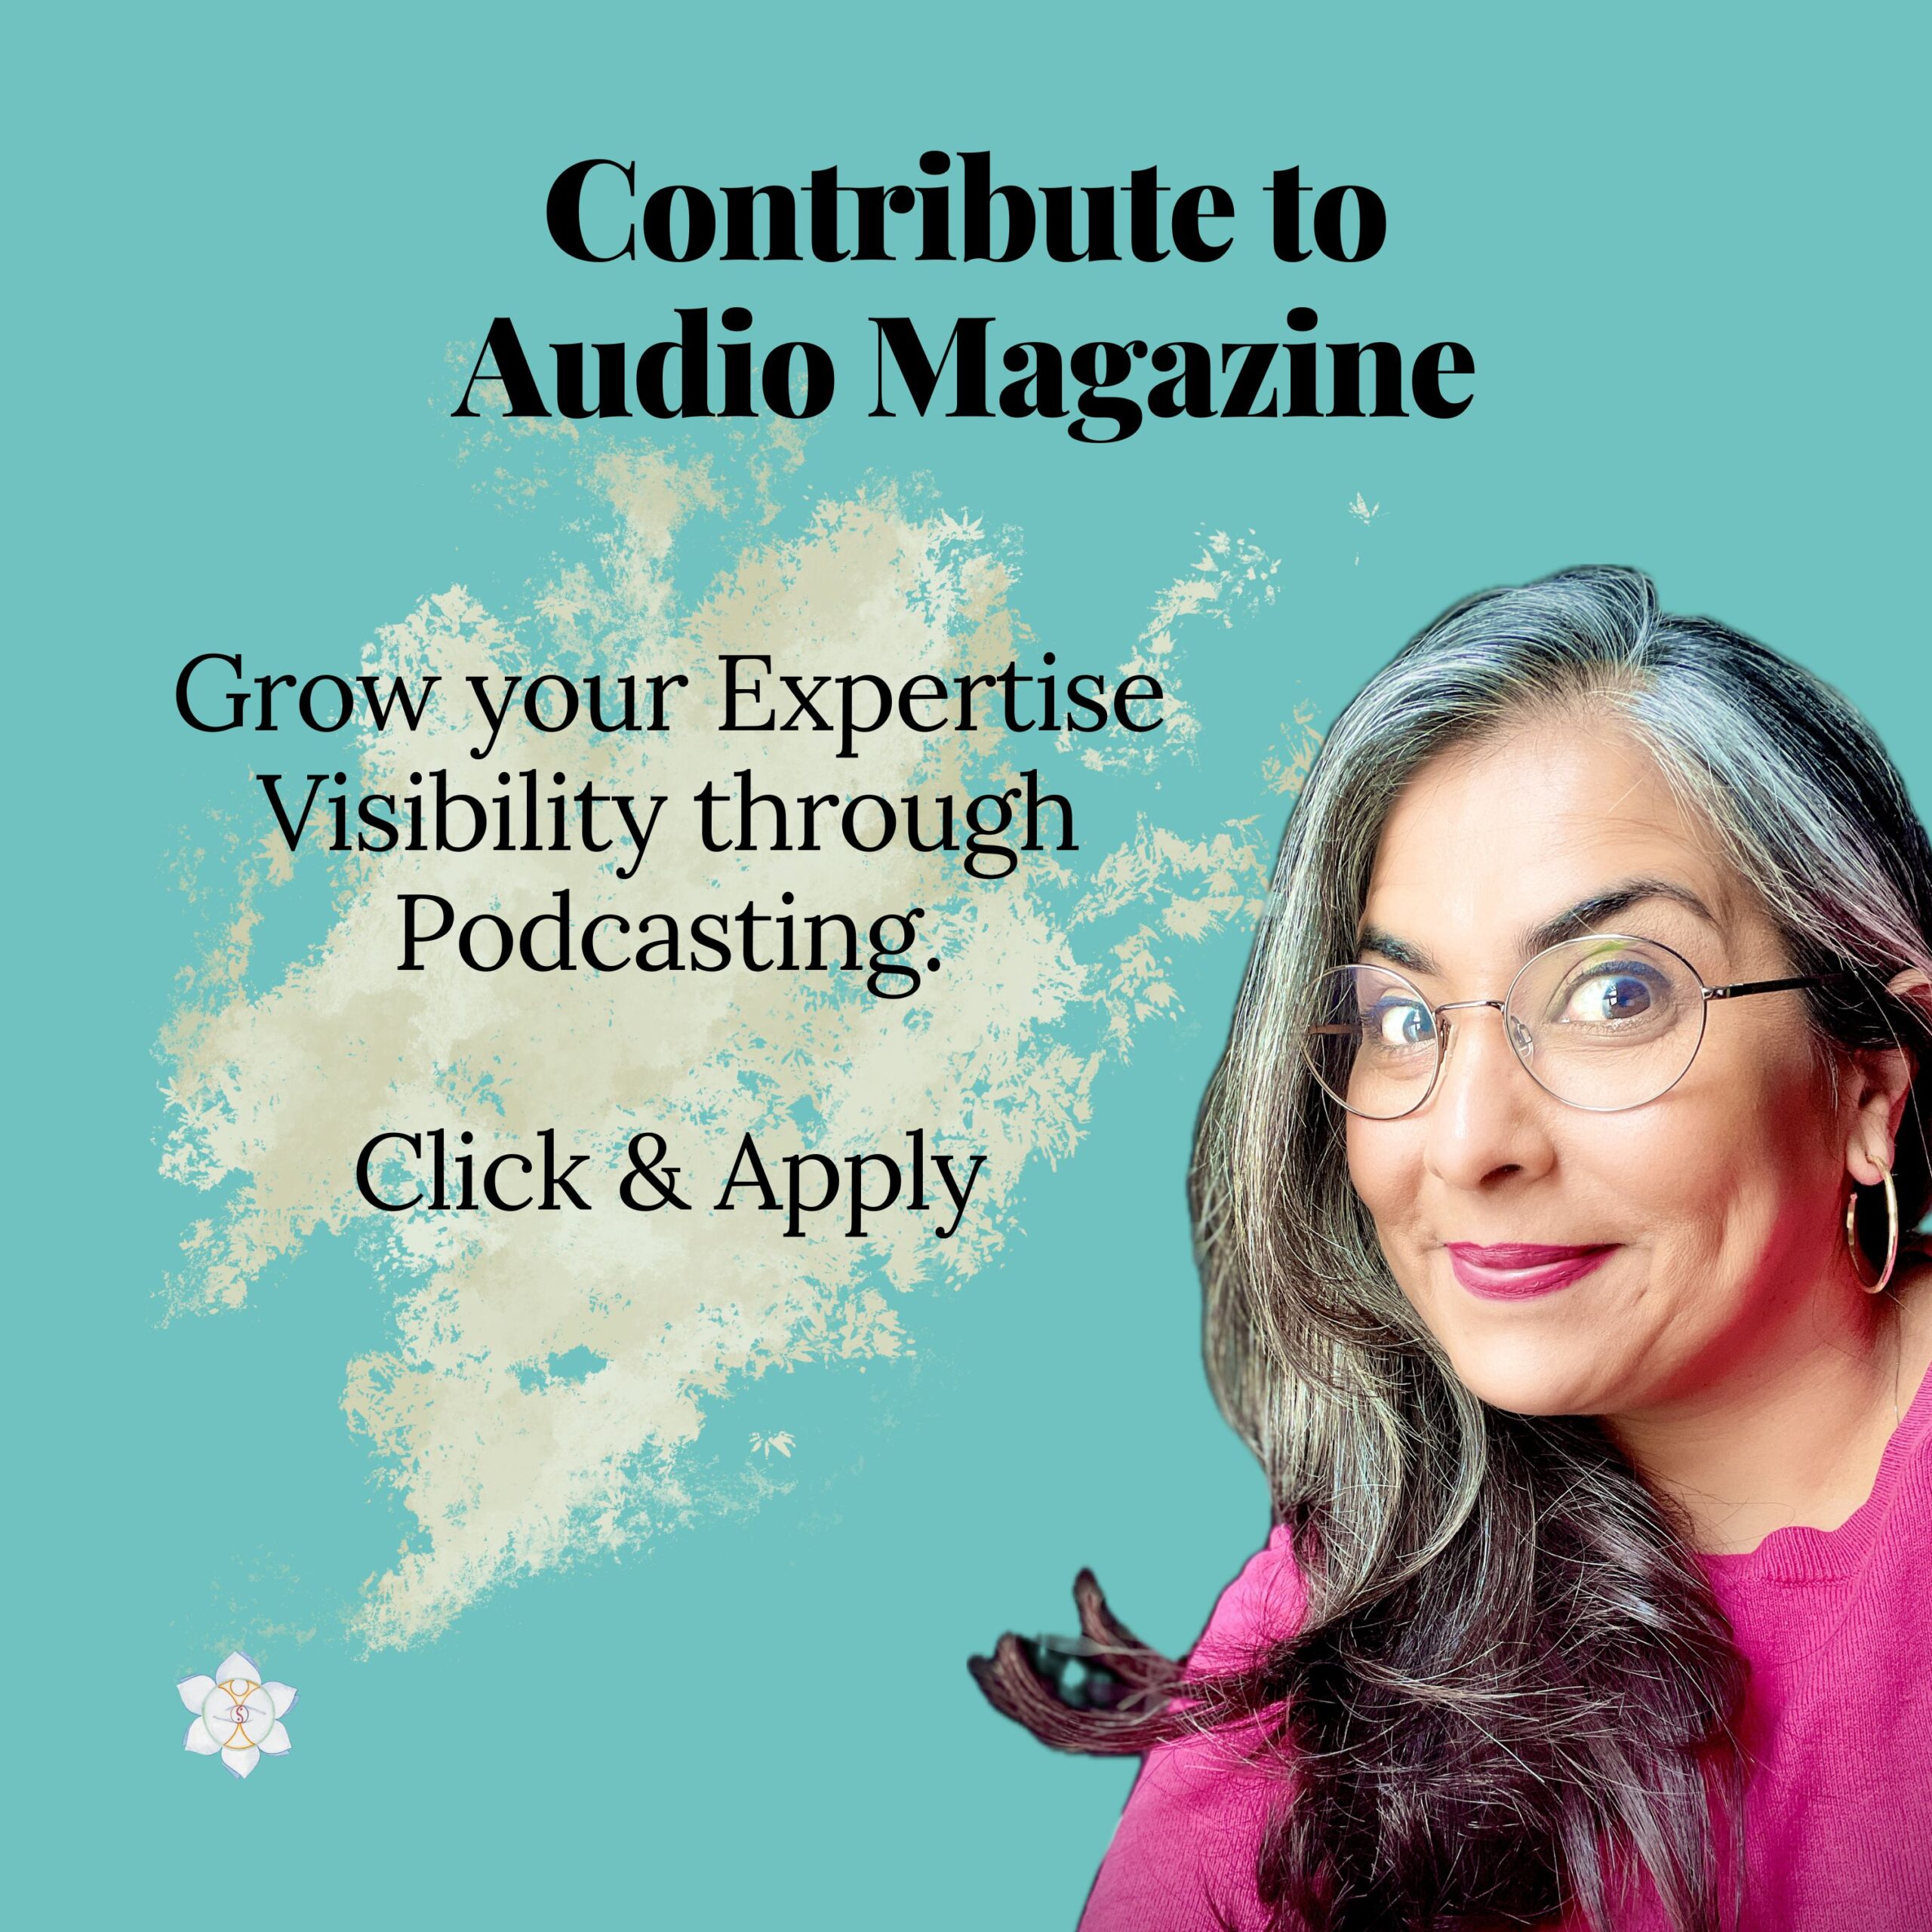 apply to be on the podcast as a contributor to a magazine